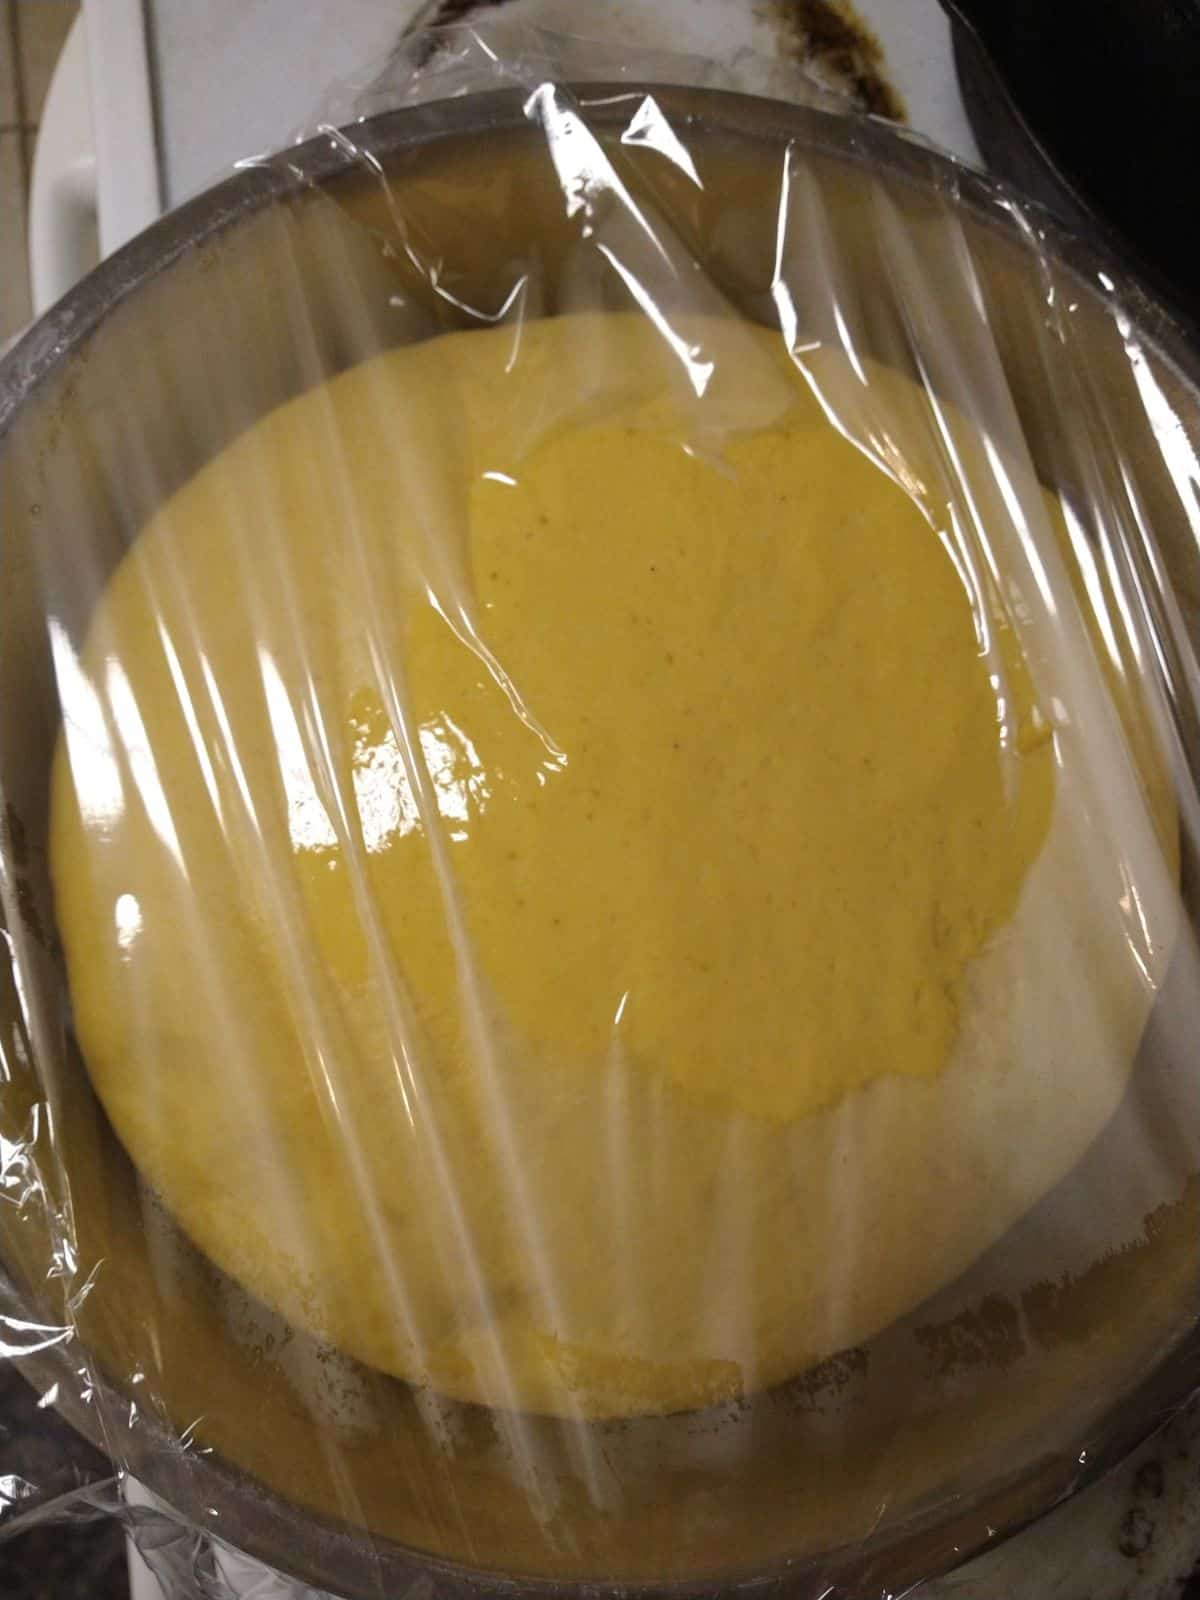 A pumpkin yeast dough in a mixing bowl covered with plastic wrap.